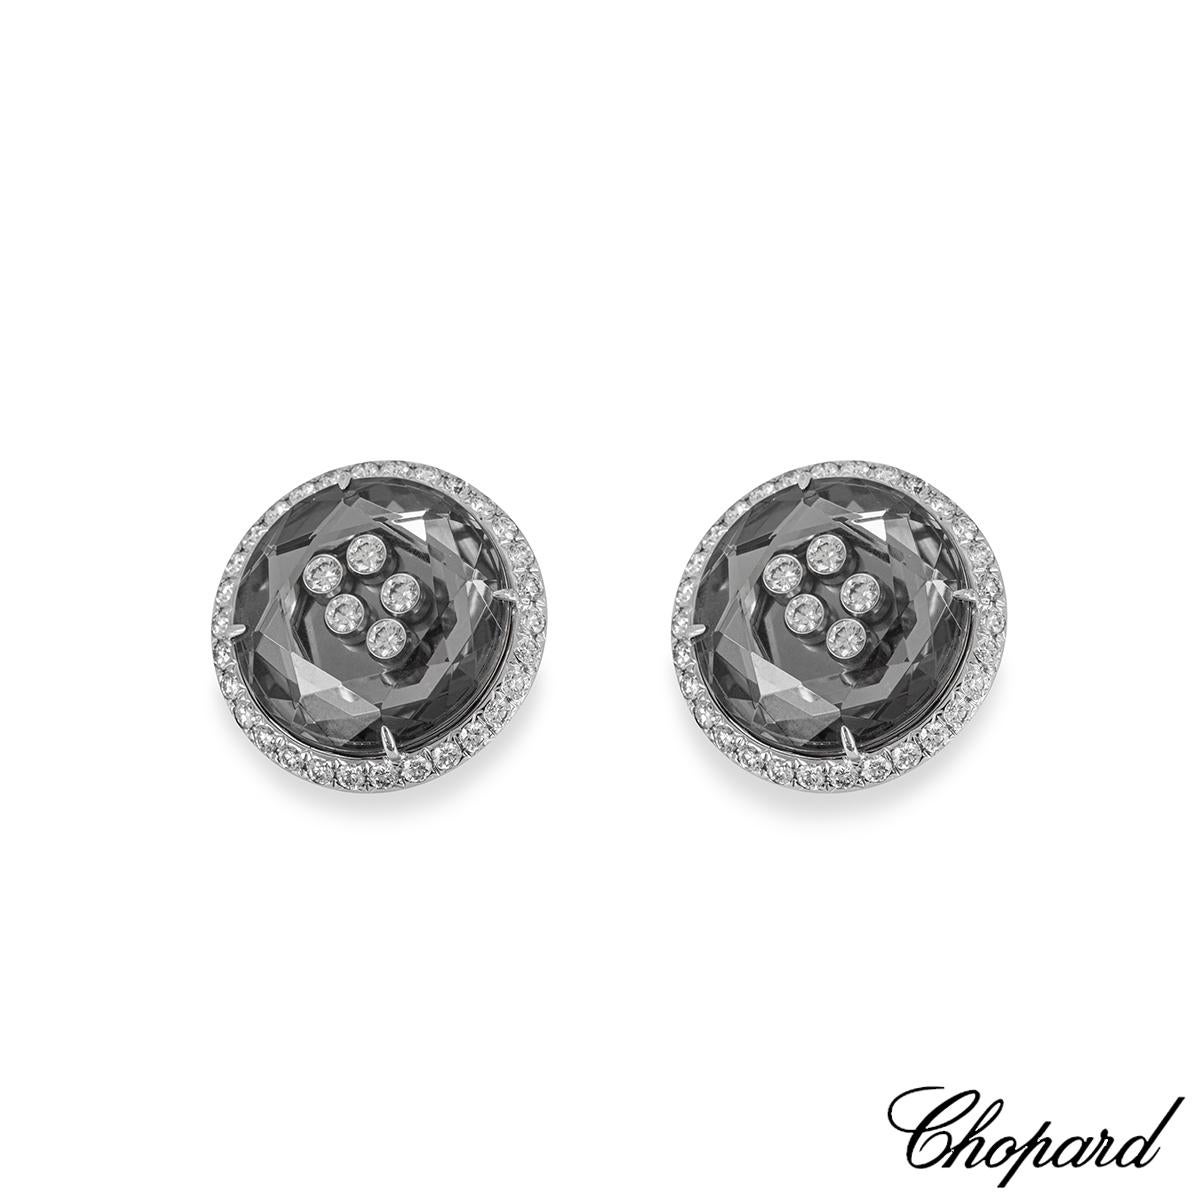 A lively pair of 18k white gold earrings by Chopard from the Happy Diamonds collection. The round ear clips are each set with 5 round brilliant cut diamonds floating behind a faceted glass with a total weight of 0.30ct. Set to the outer edge of each